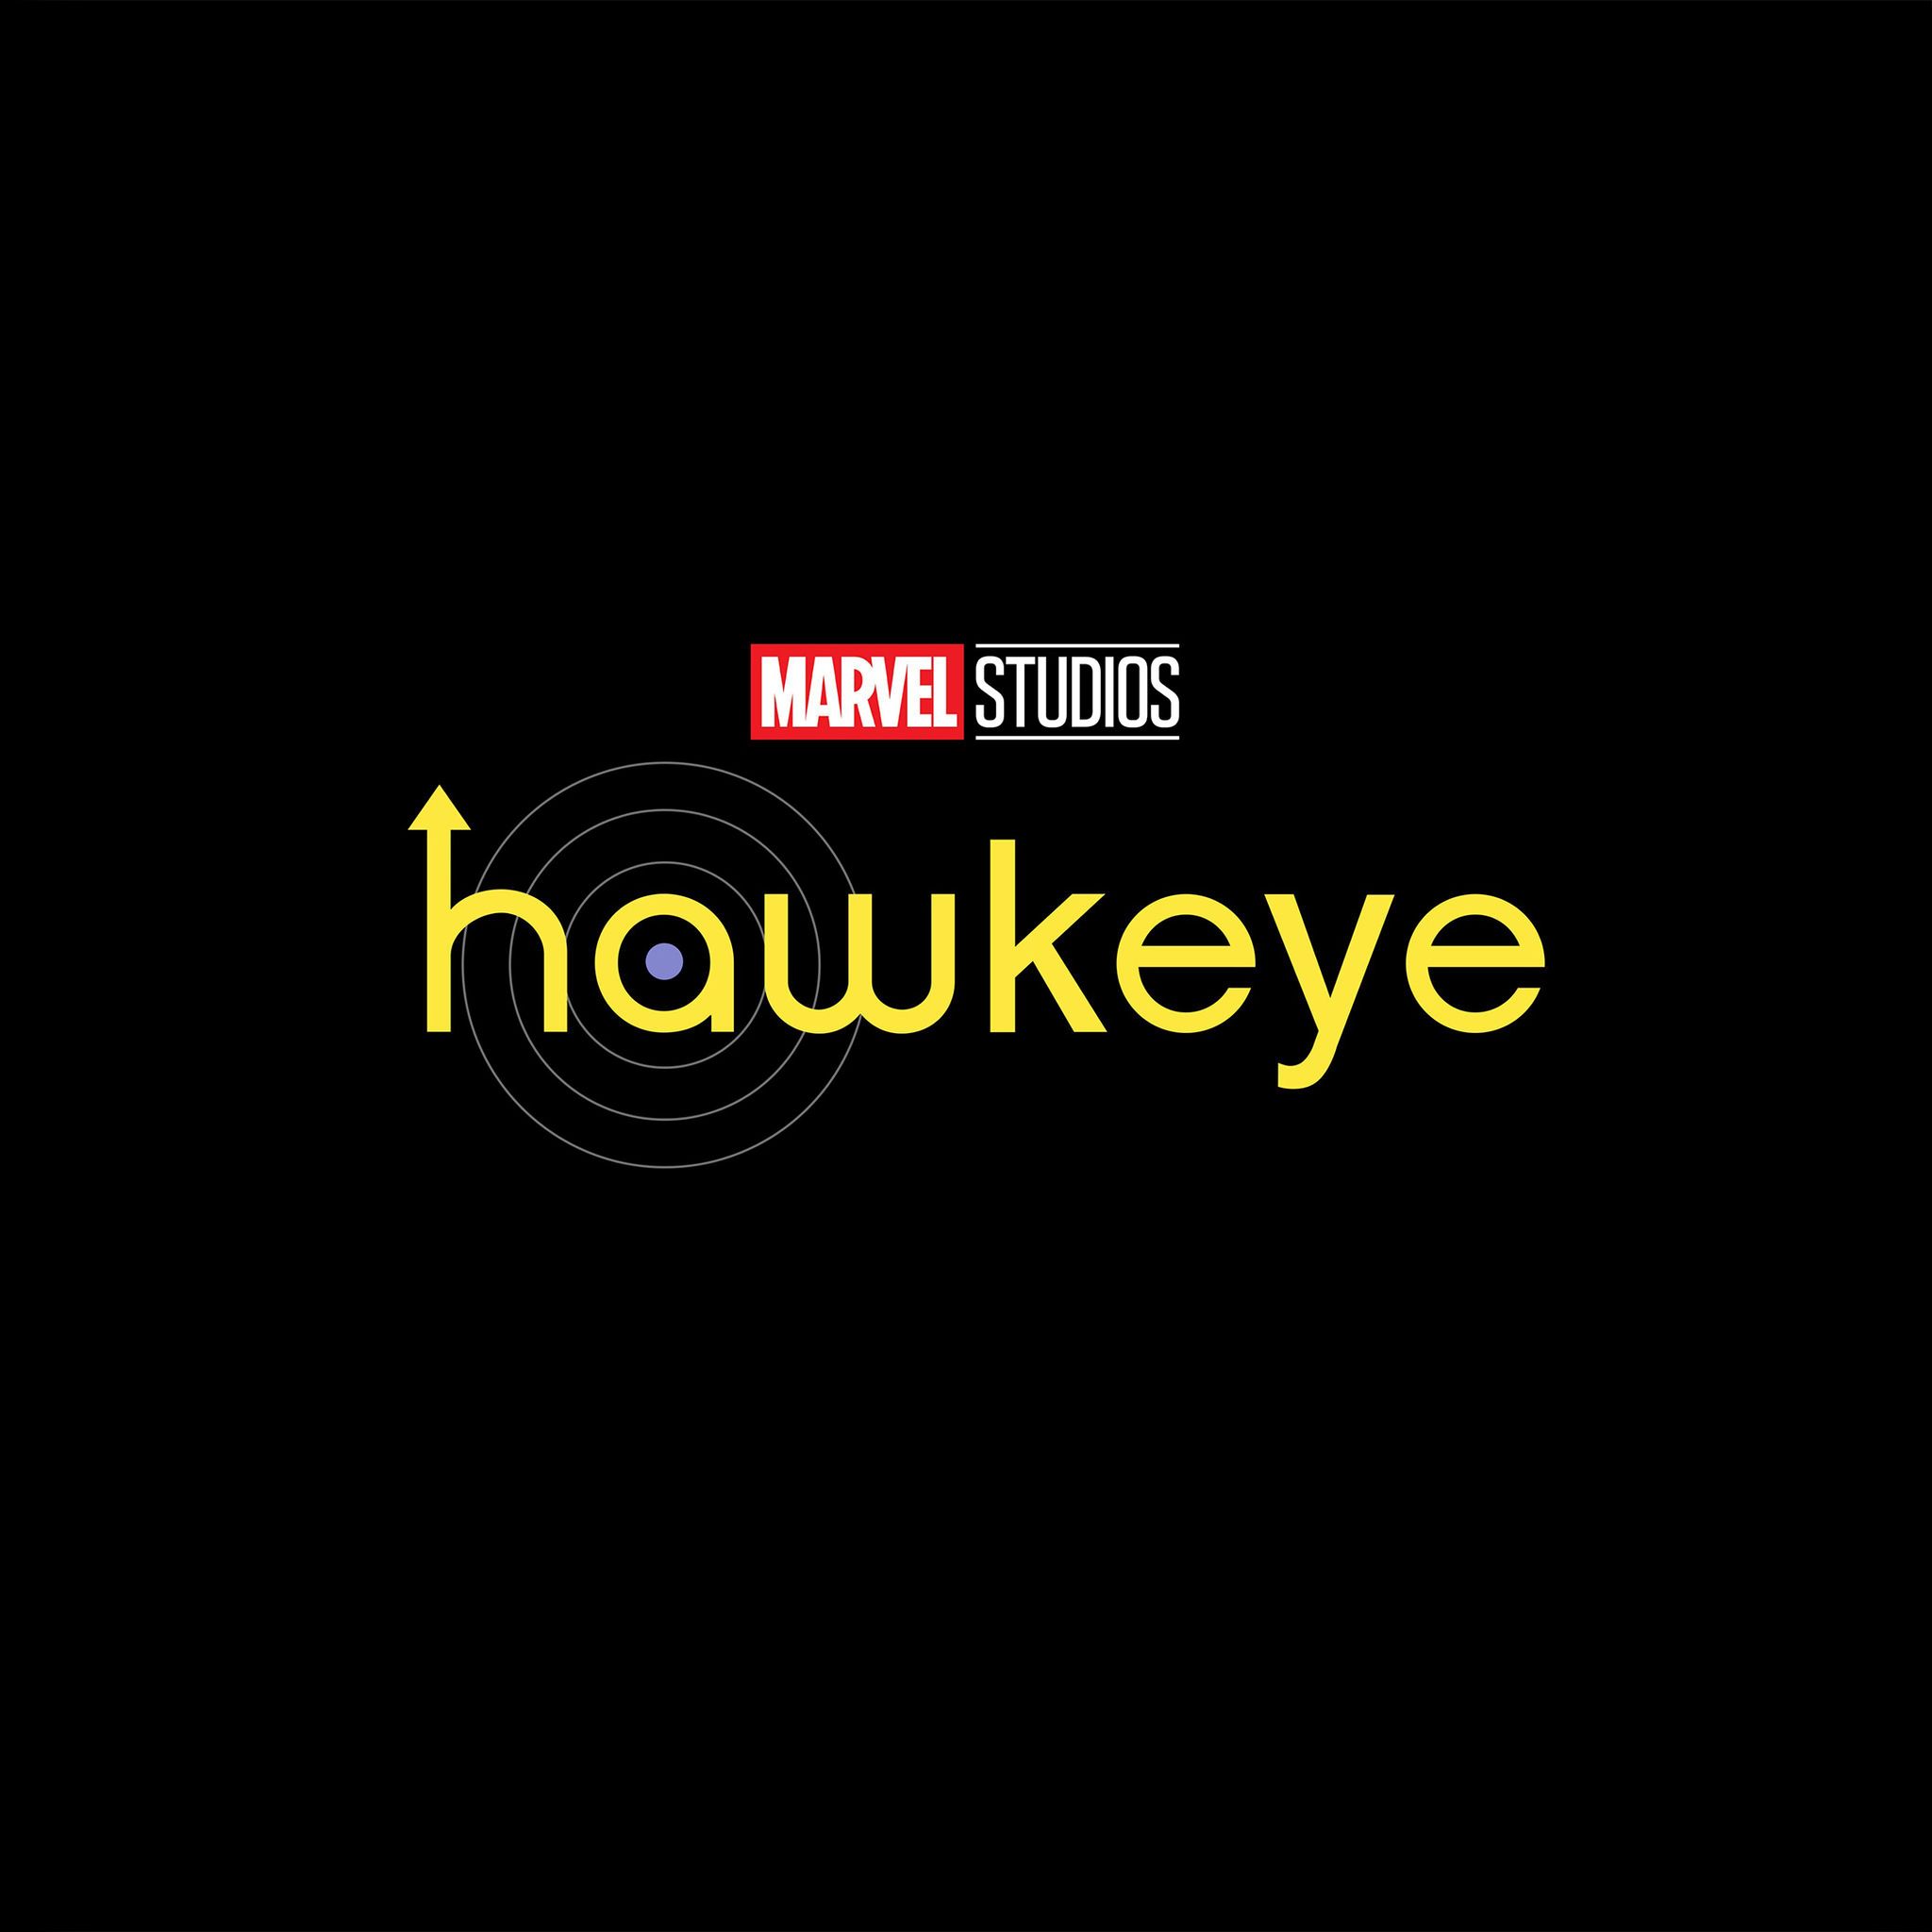 Marvel Hawkeye 2021 Disney Plus iPad Air HD 4k Wallpaper, Image, Background, Photo and Picture